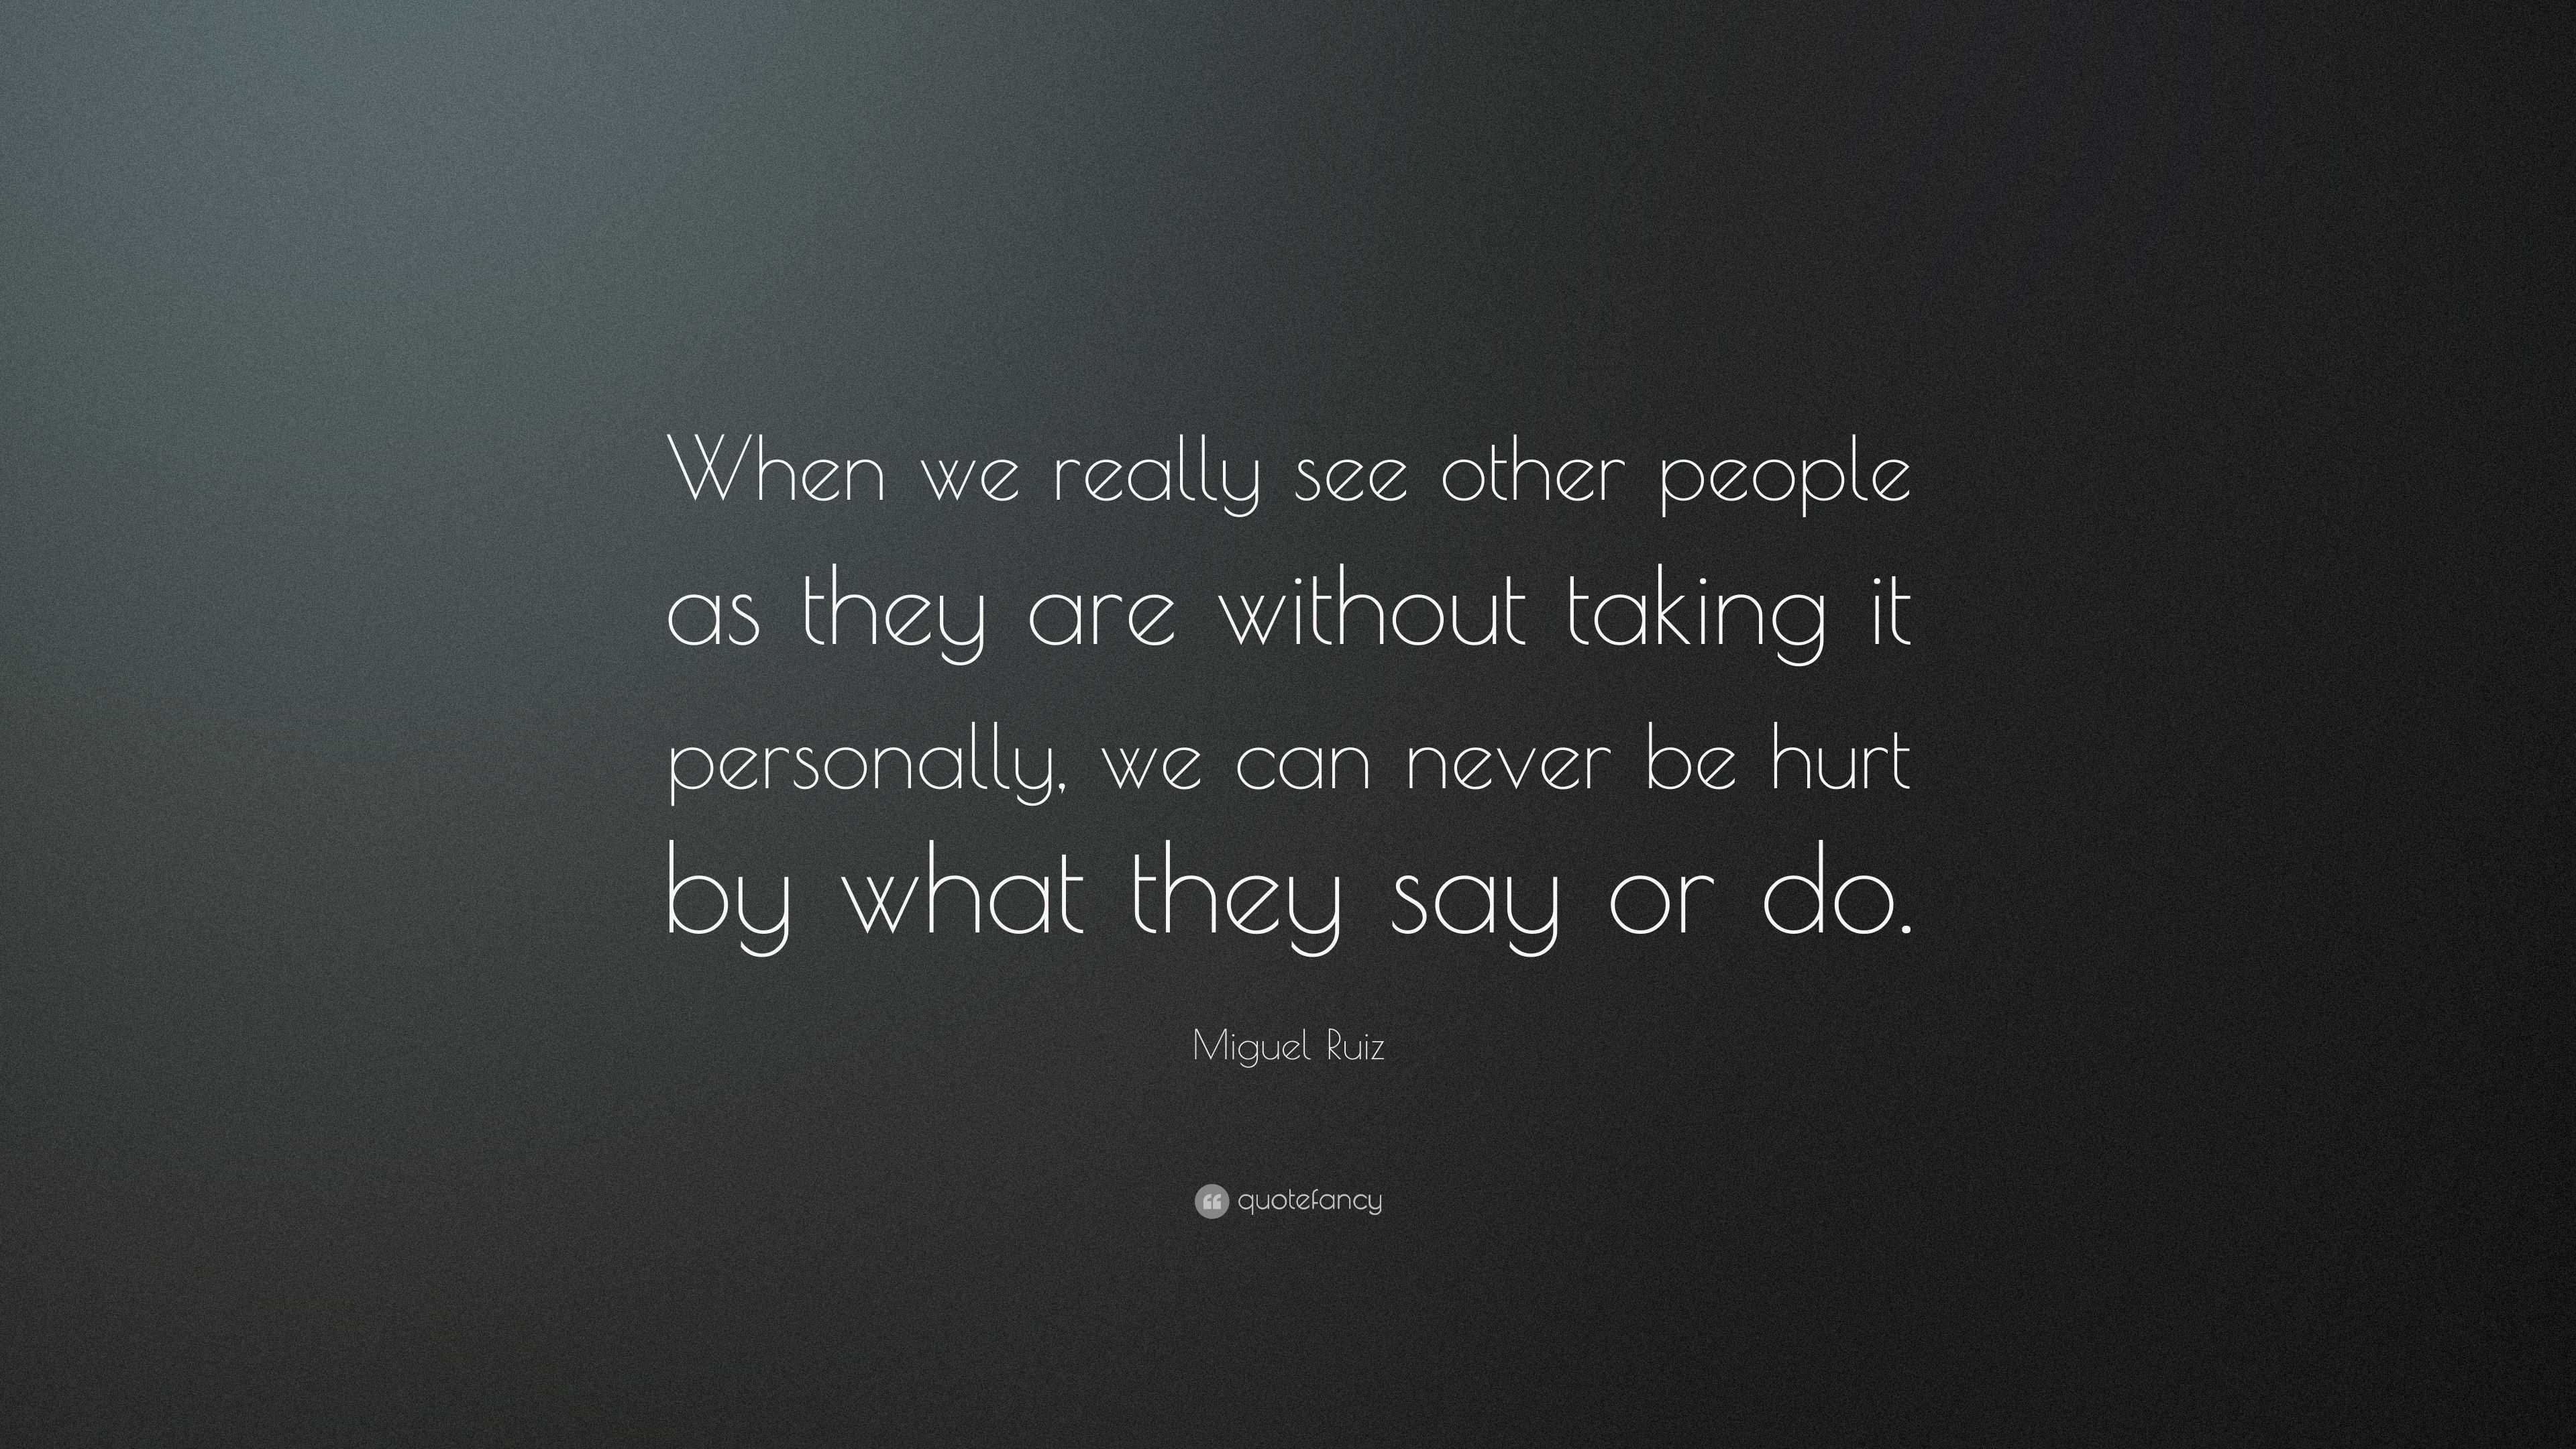 Miguel Ruiz Quote: “When we really see other people as they are without ...